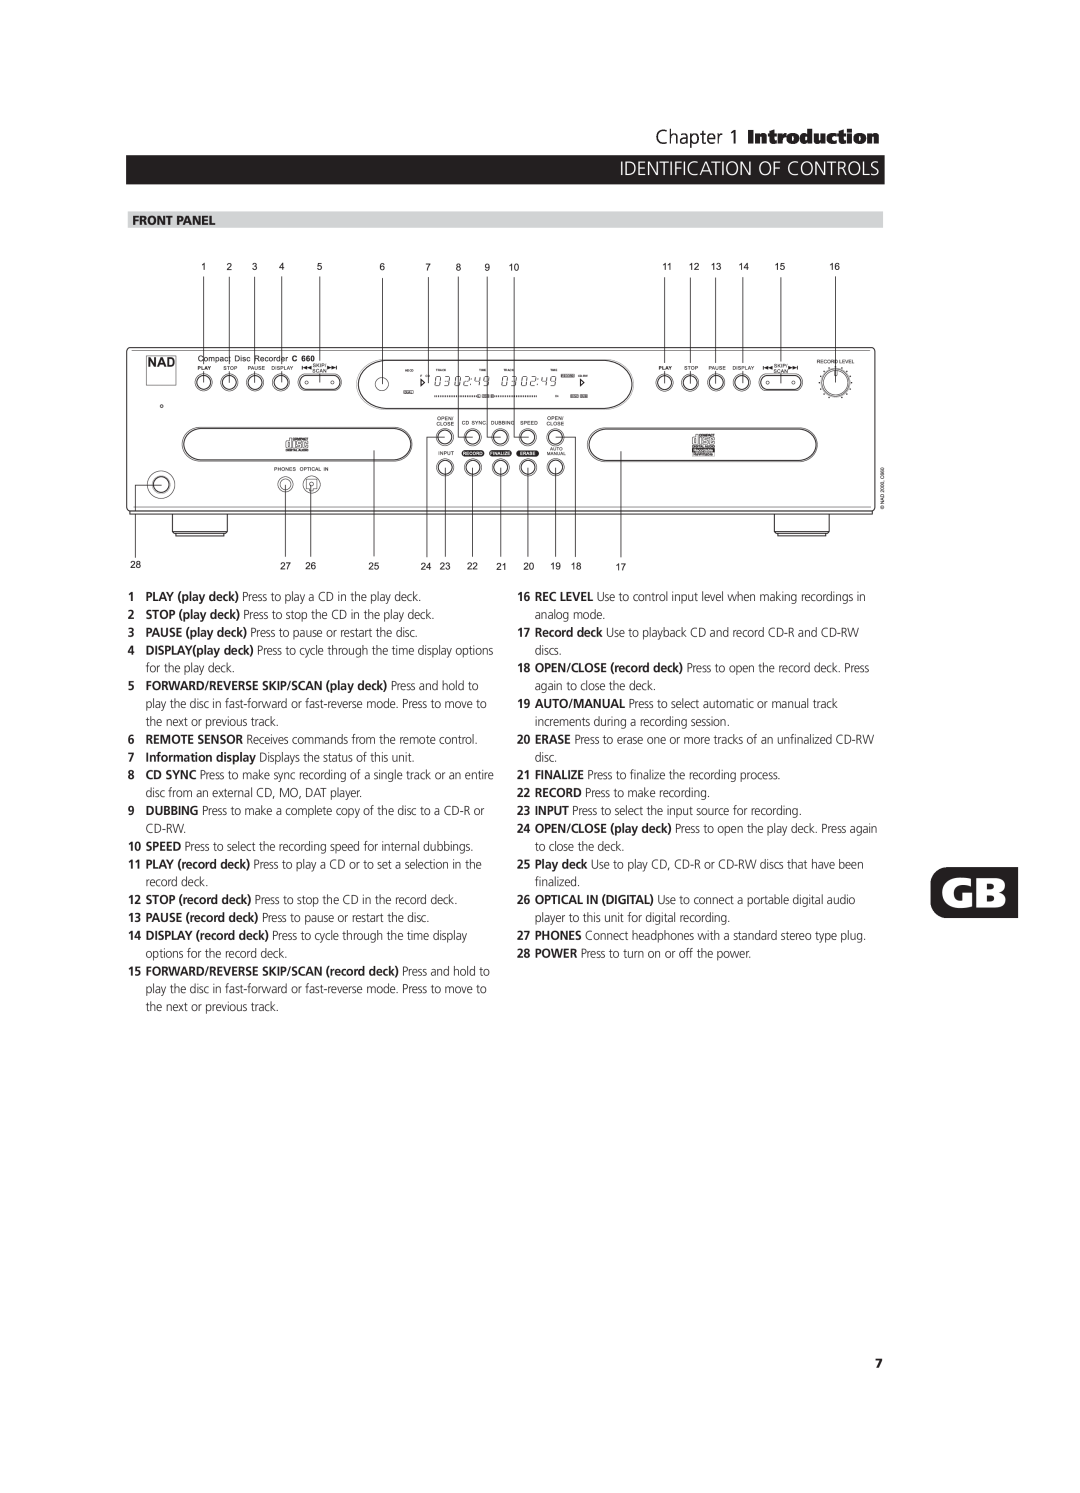 NAD C660 owner manual Identification Of Controls, Front Panel, Introduction 